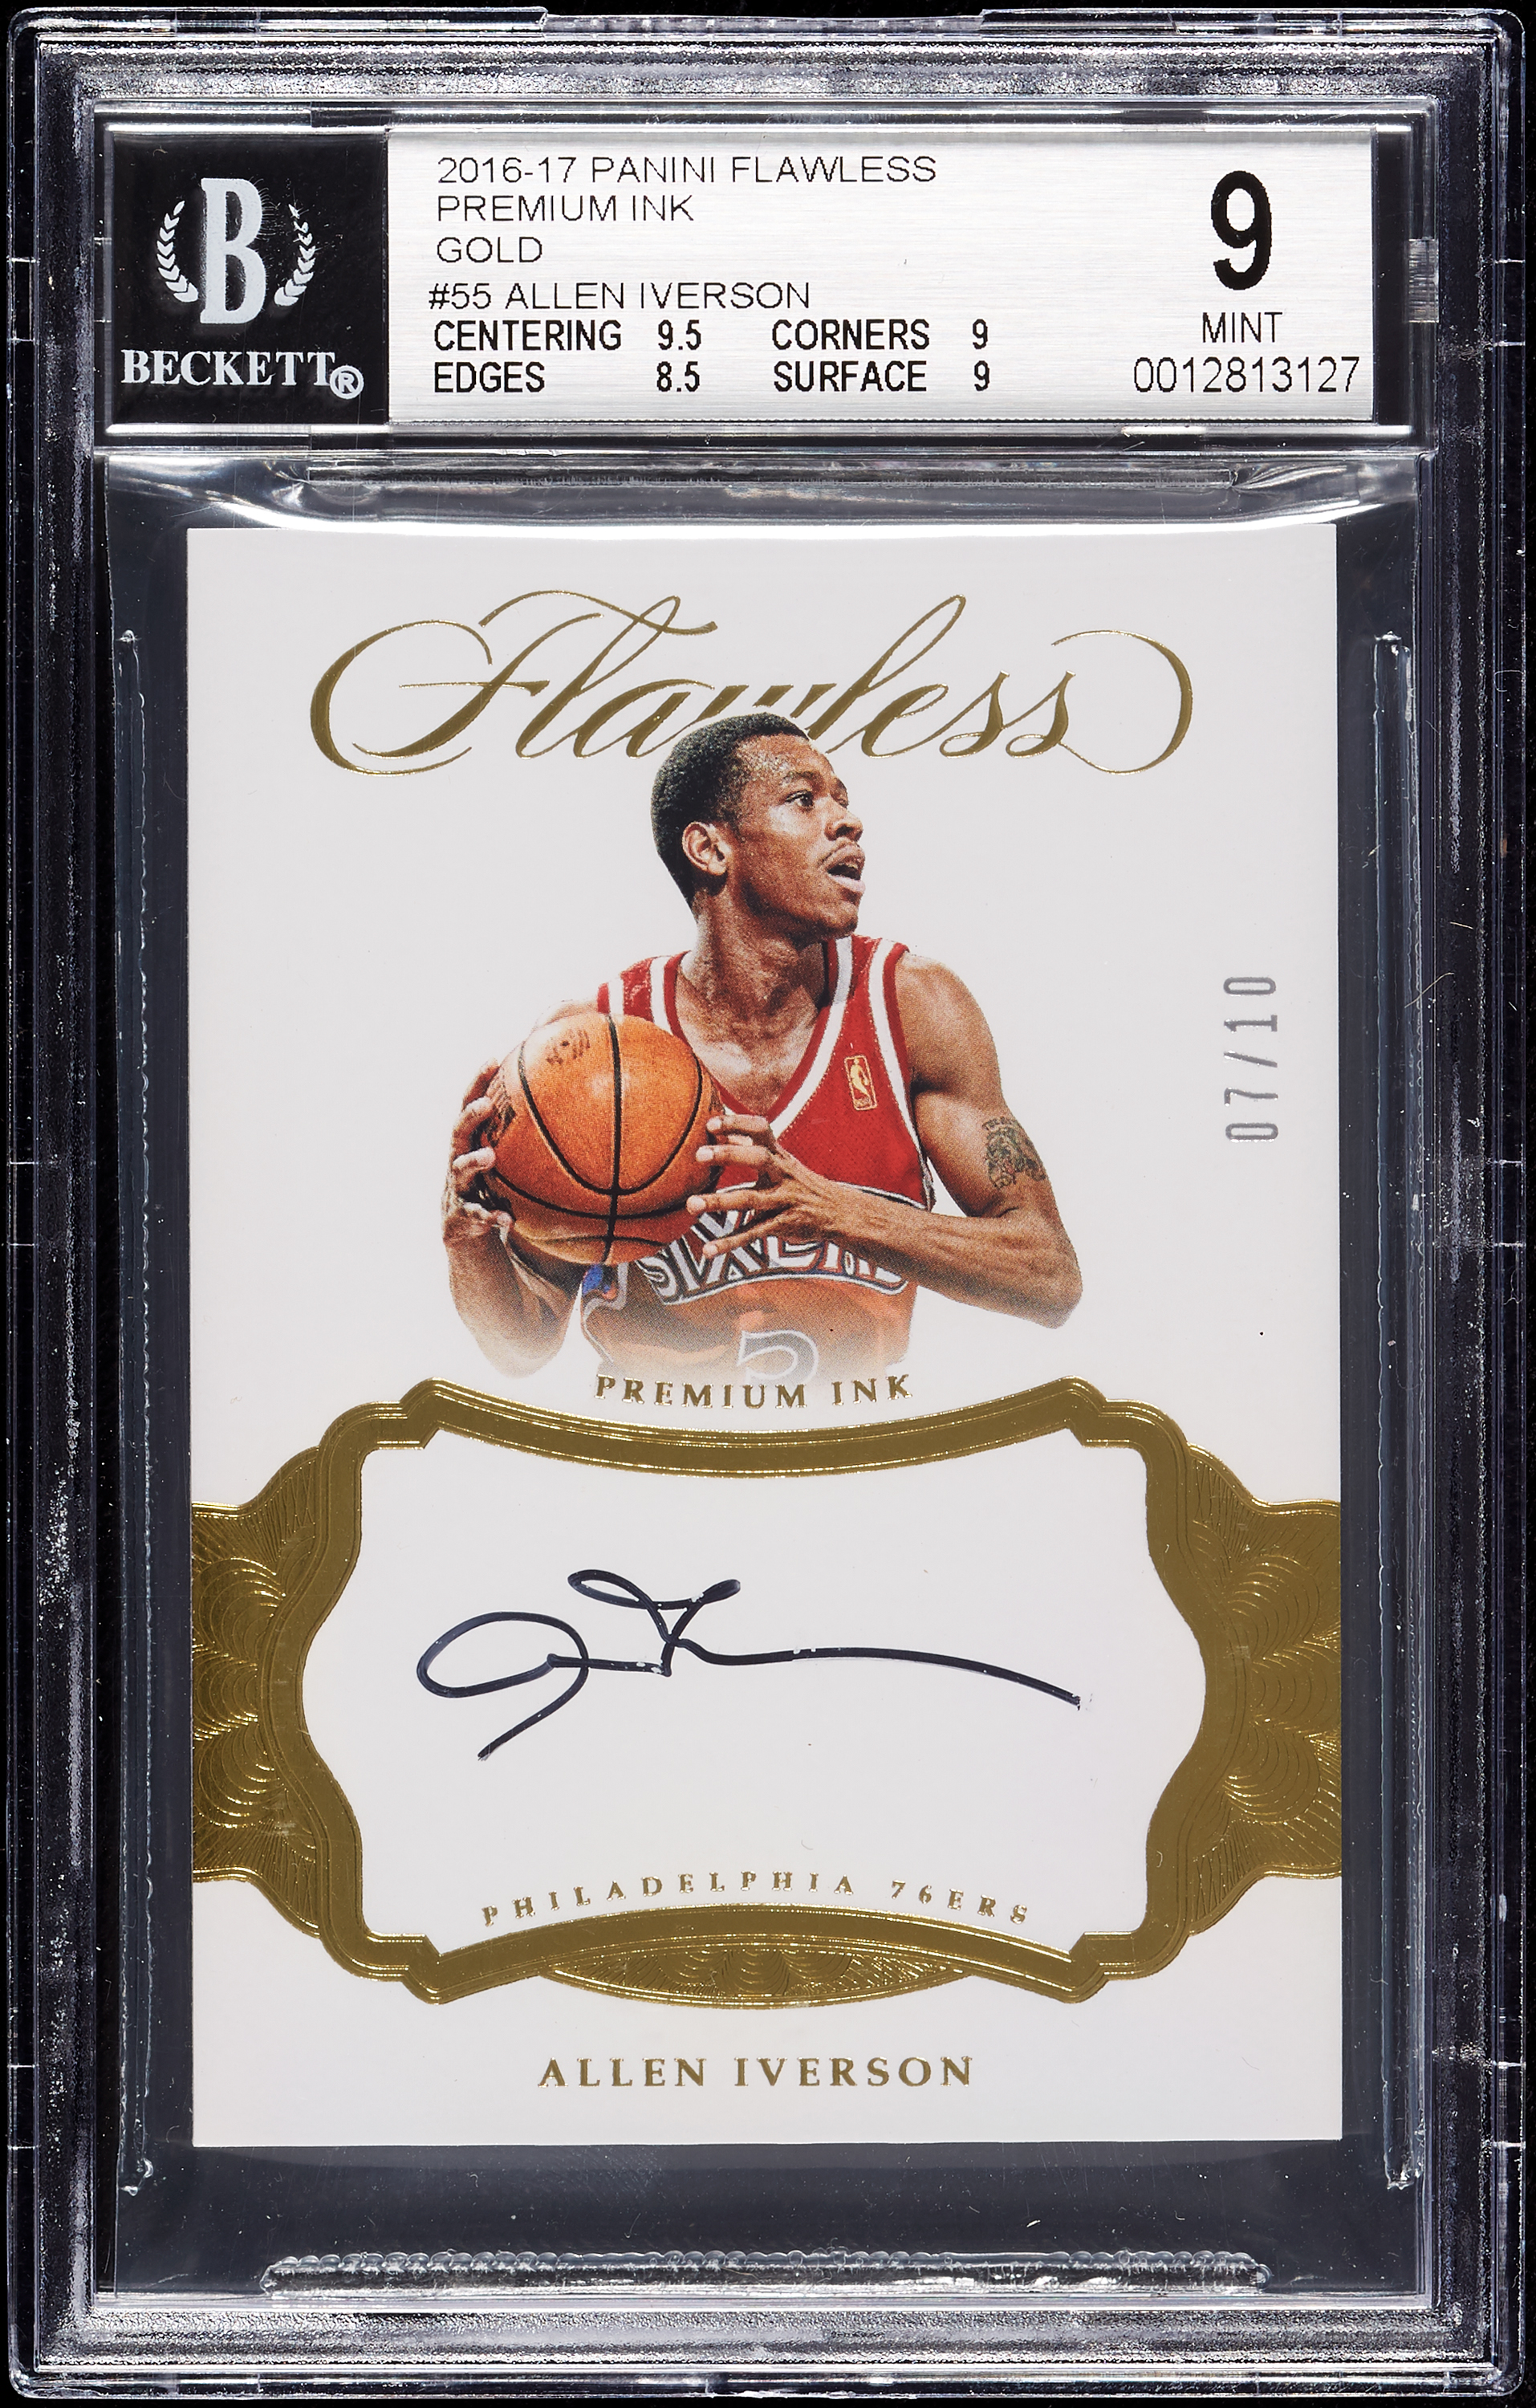 ALLEN IVERSON flawless auto 76ers